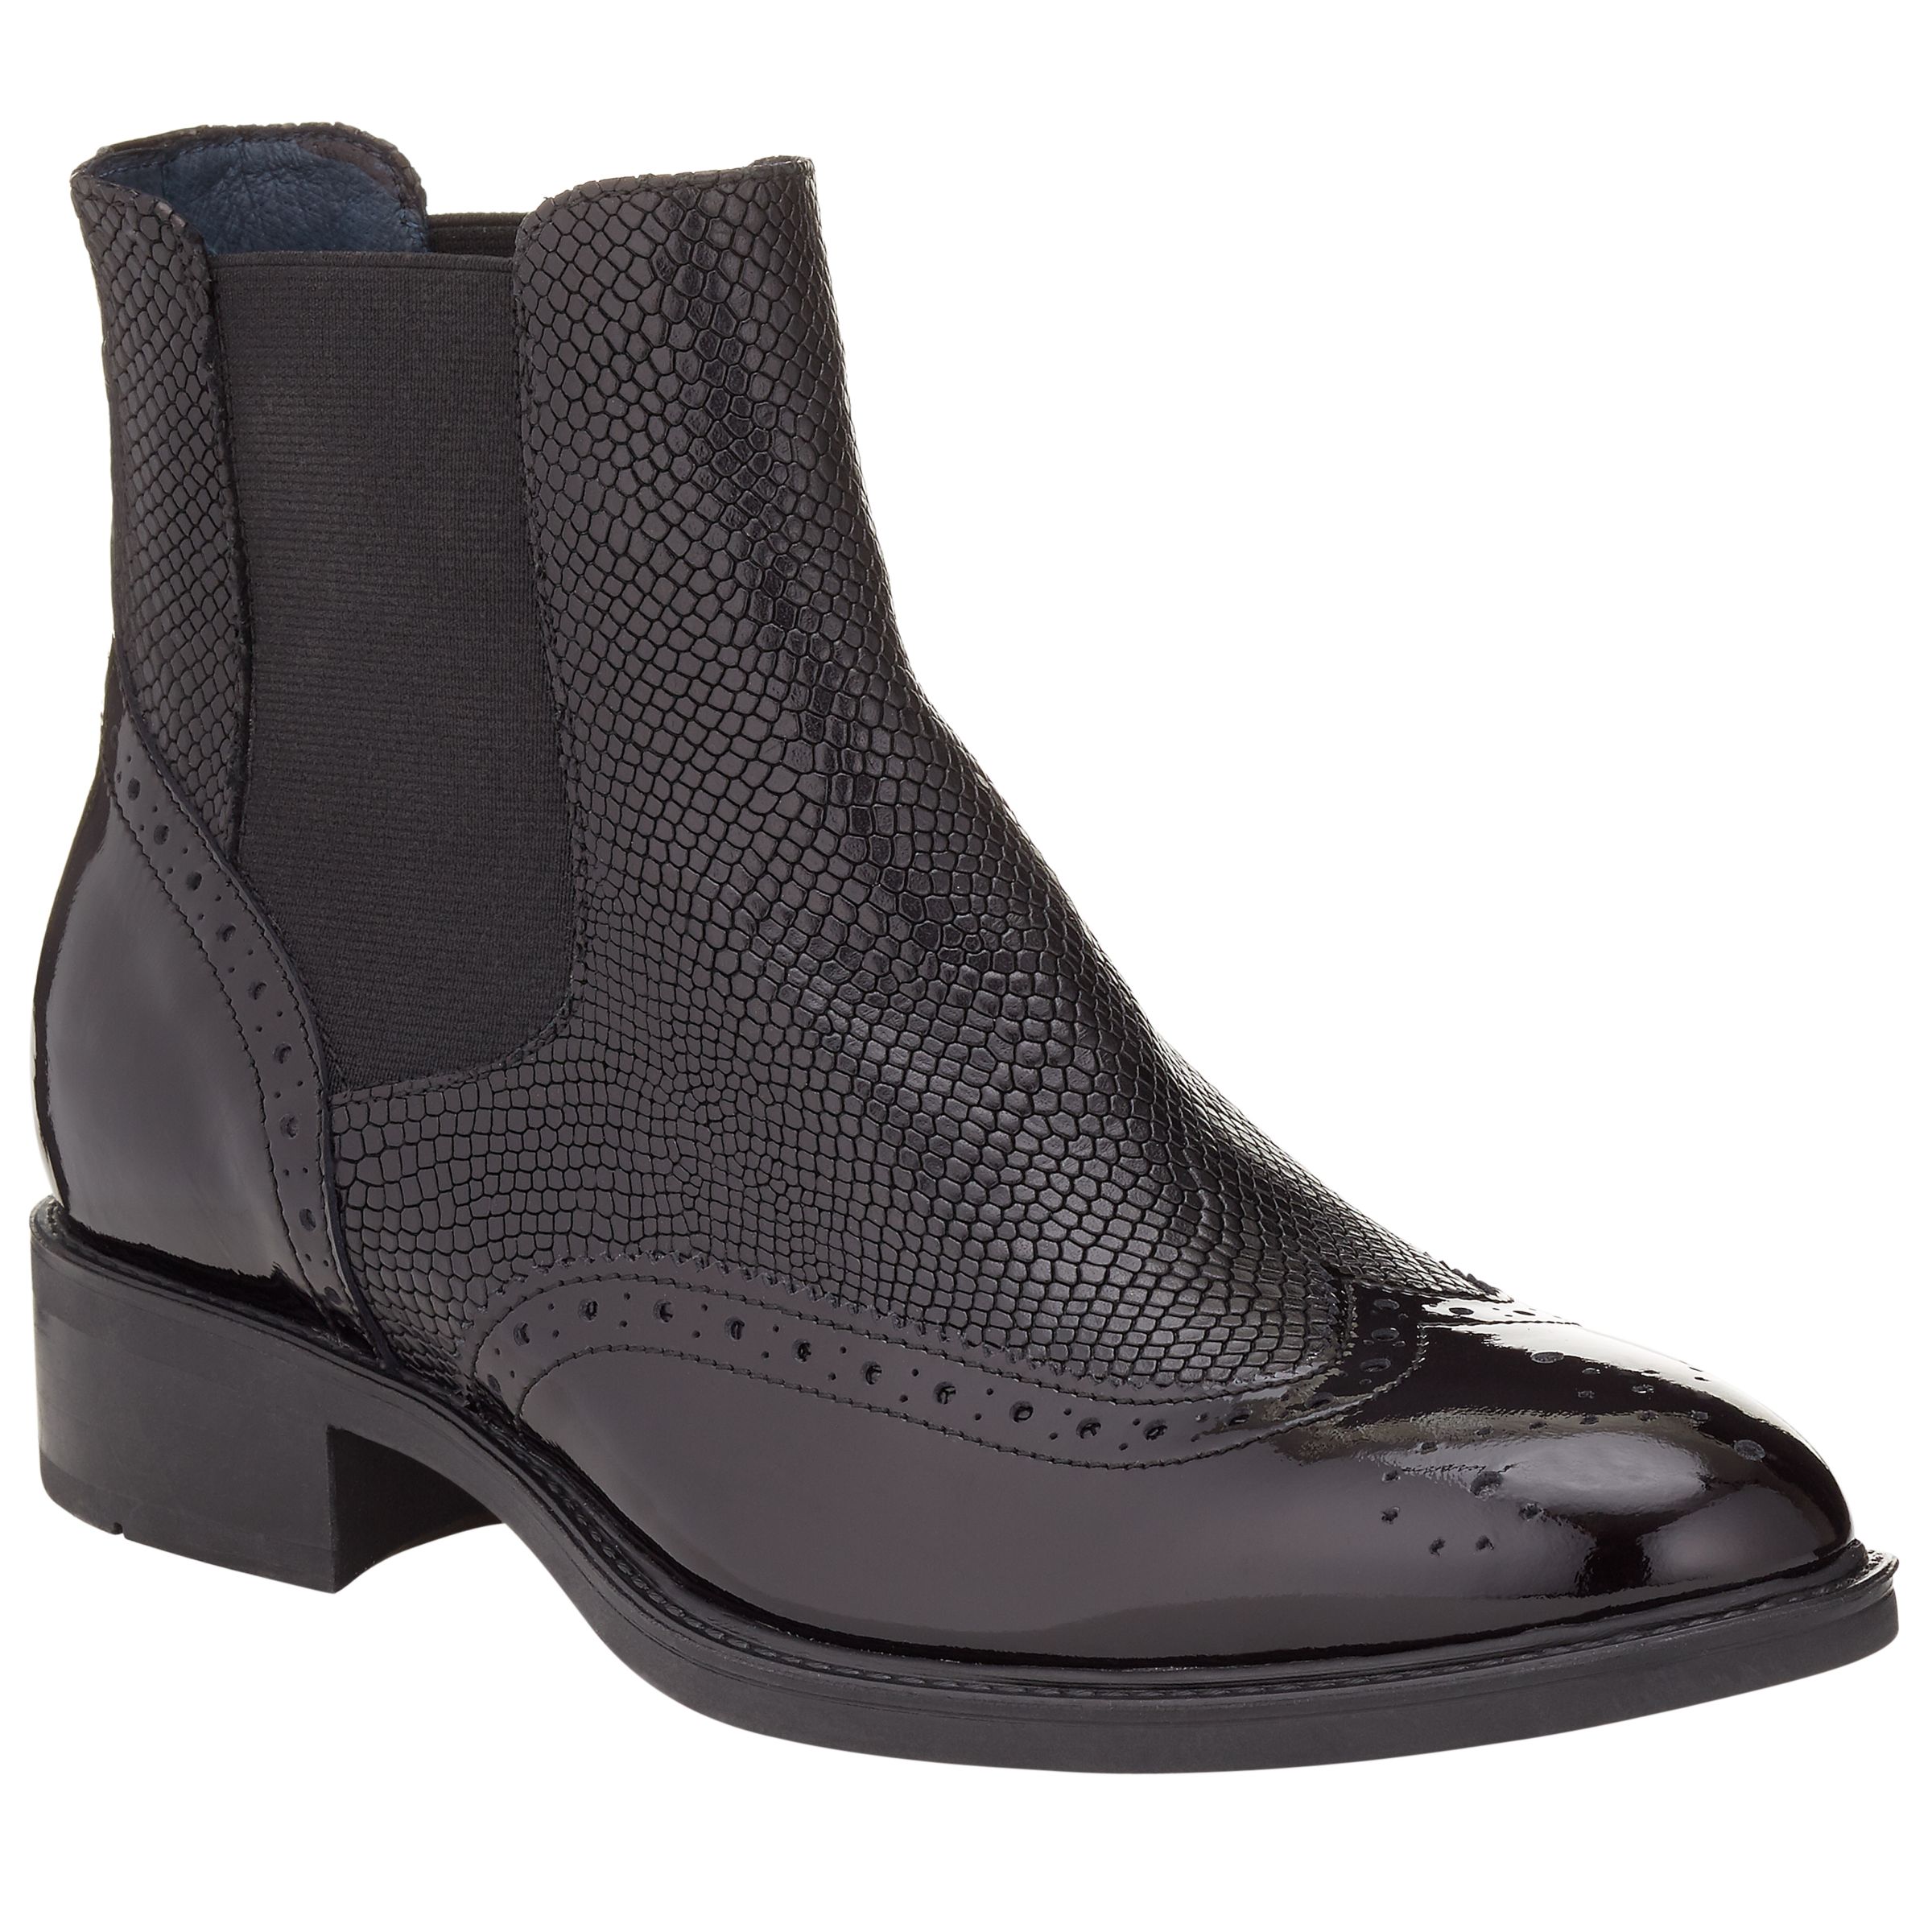 Somerset by Alice Temperley Pilton Brogue Ankle Boots, Black Patent Leather